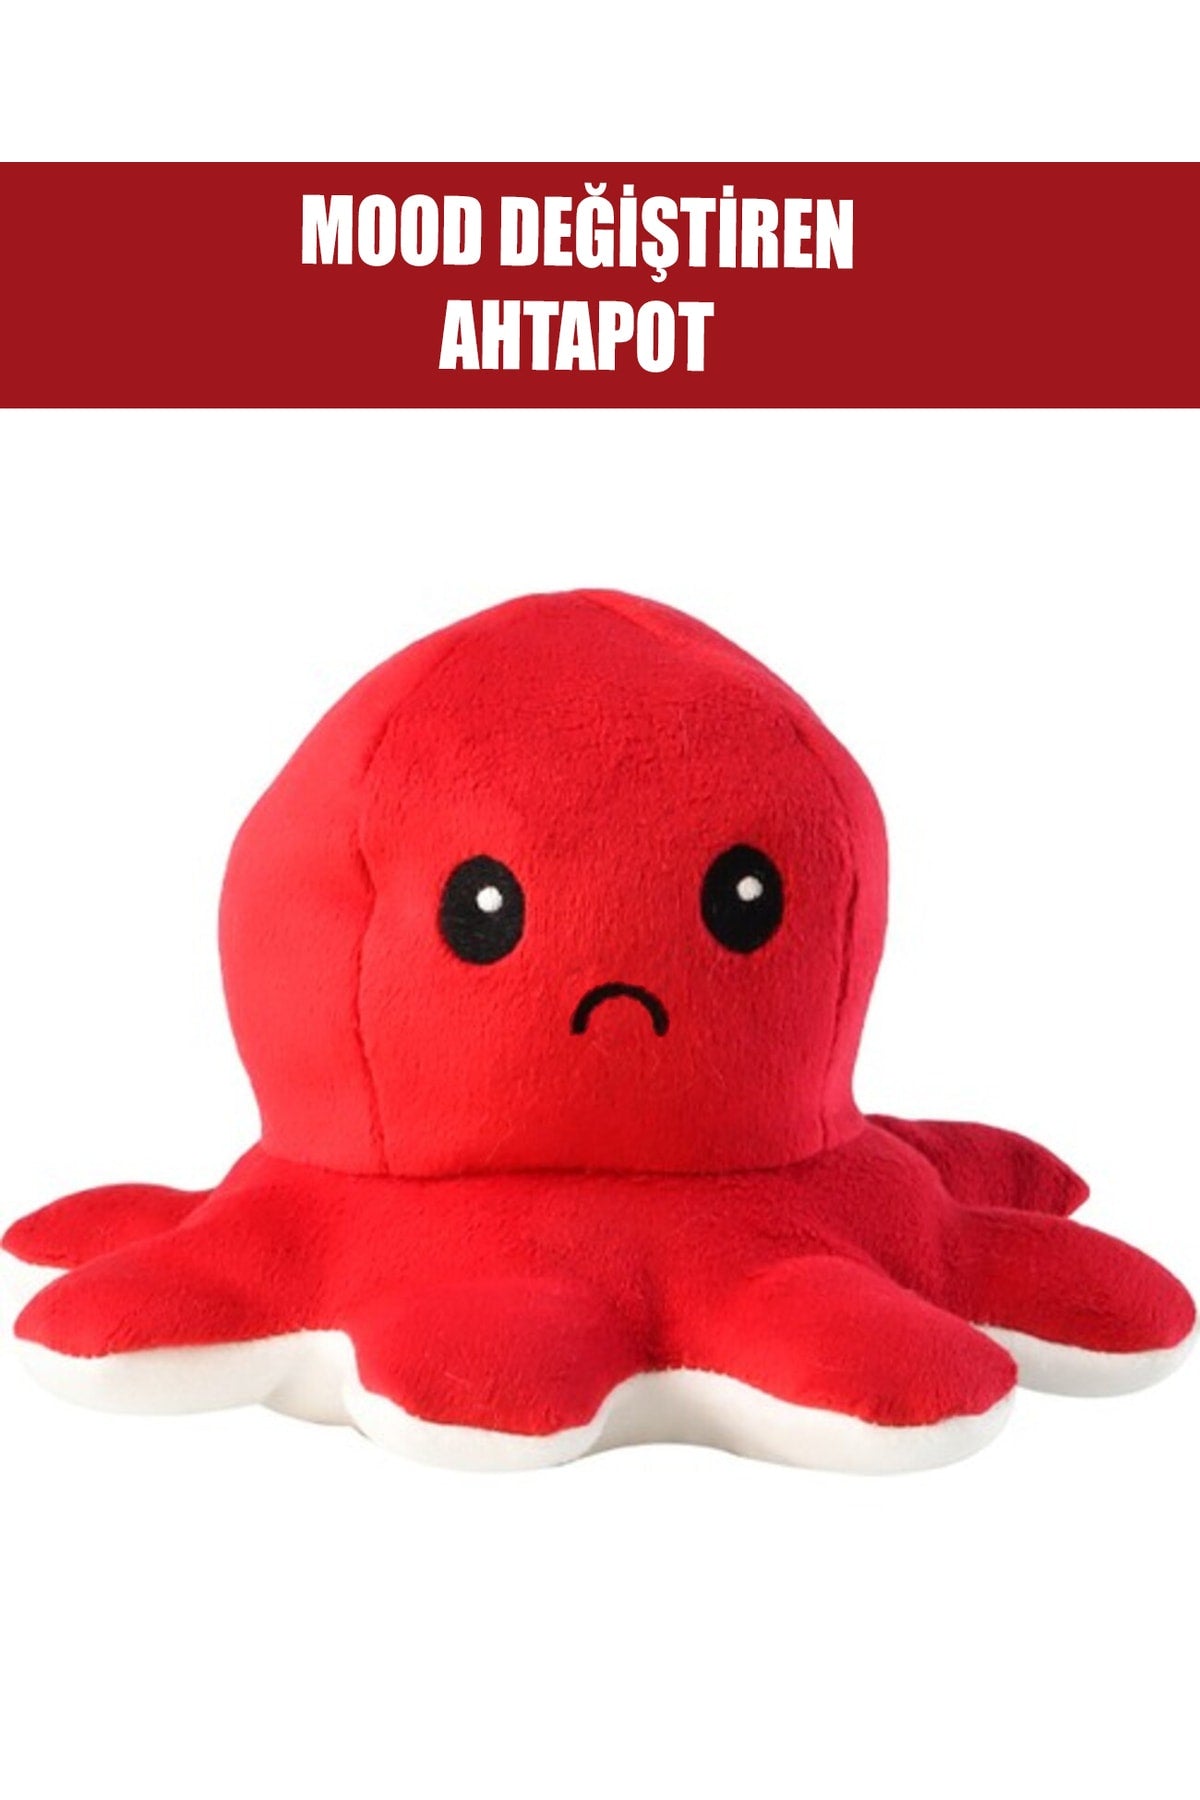 Mood Changing Octopus Red-White